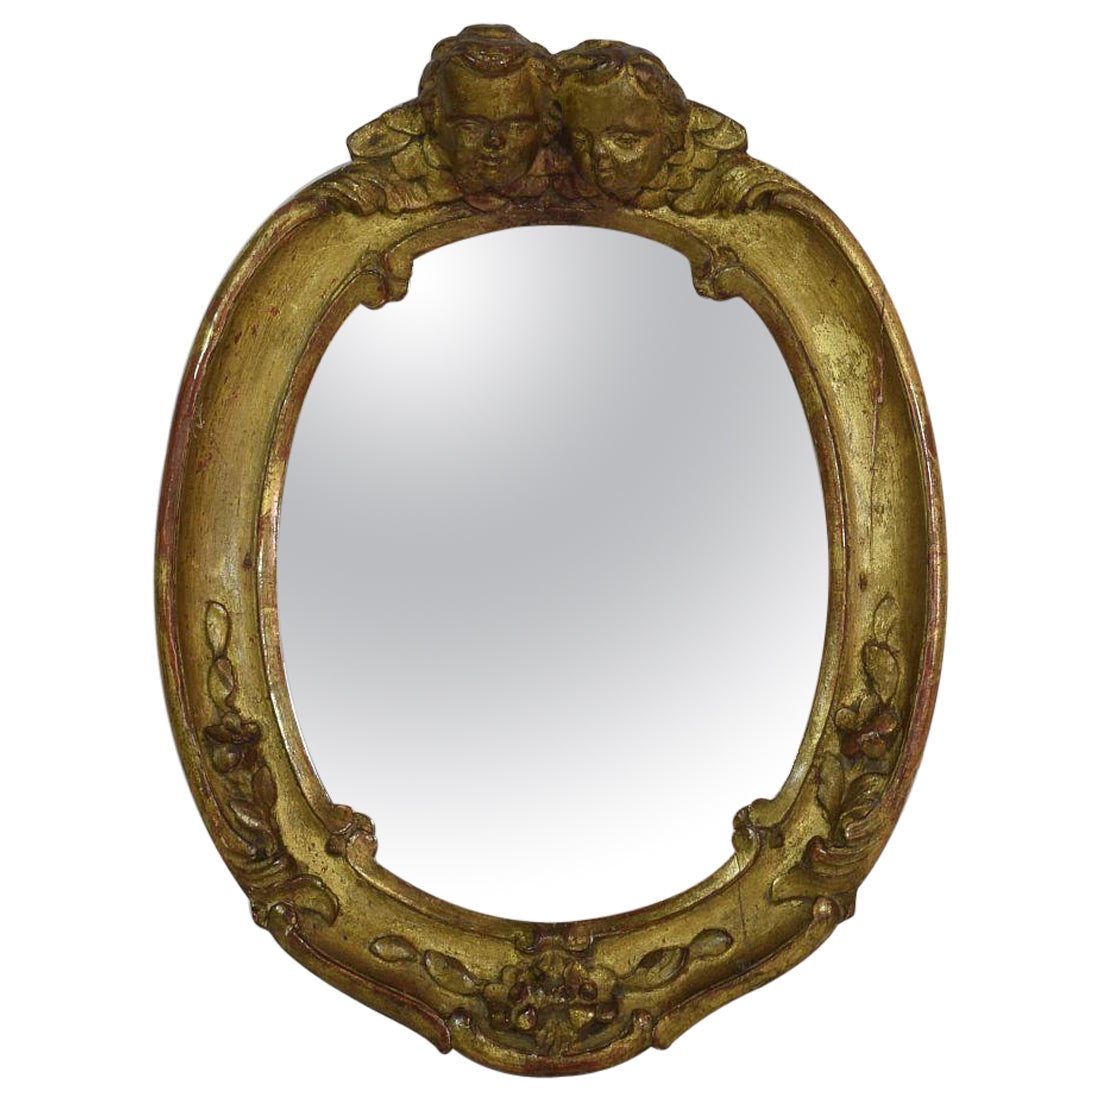 Small French 18th Century Baroque Giltwood Mirror